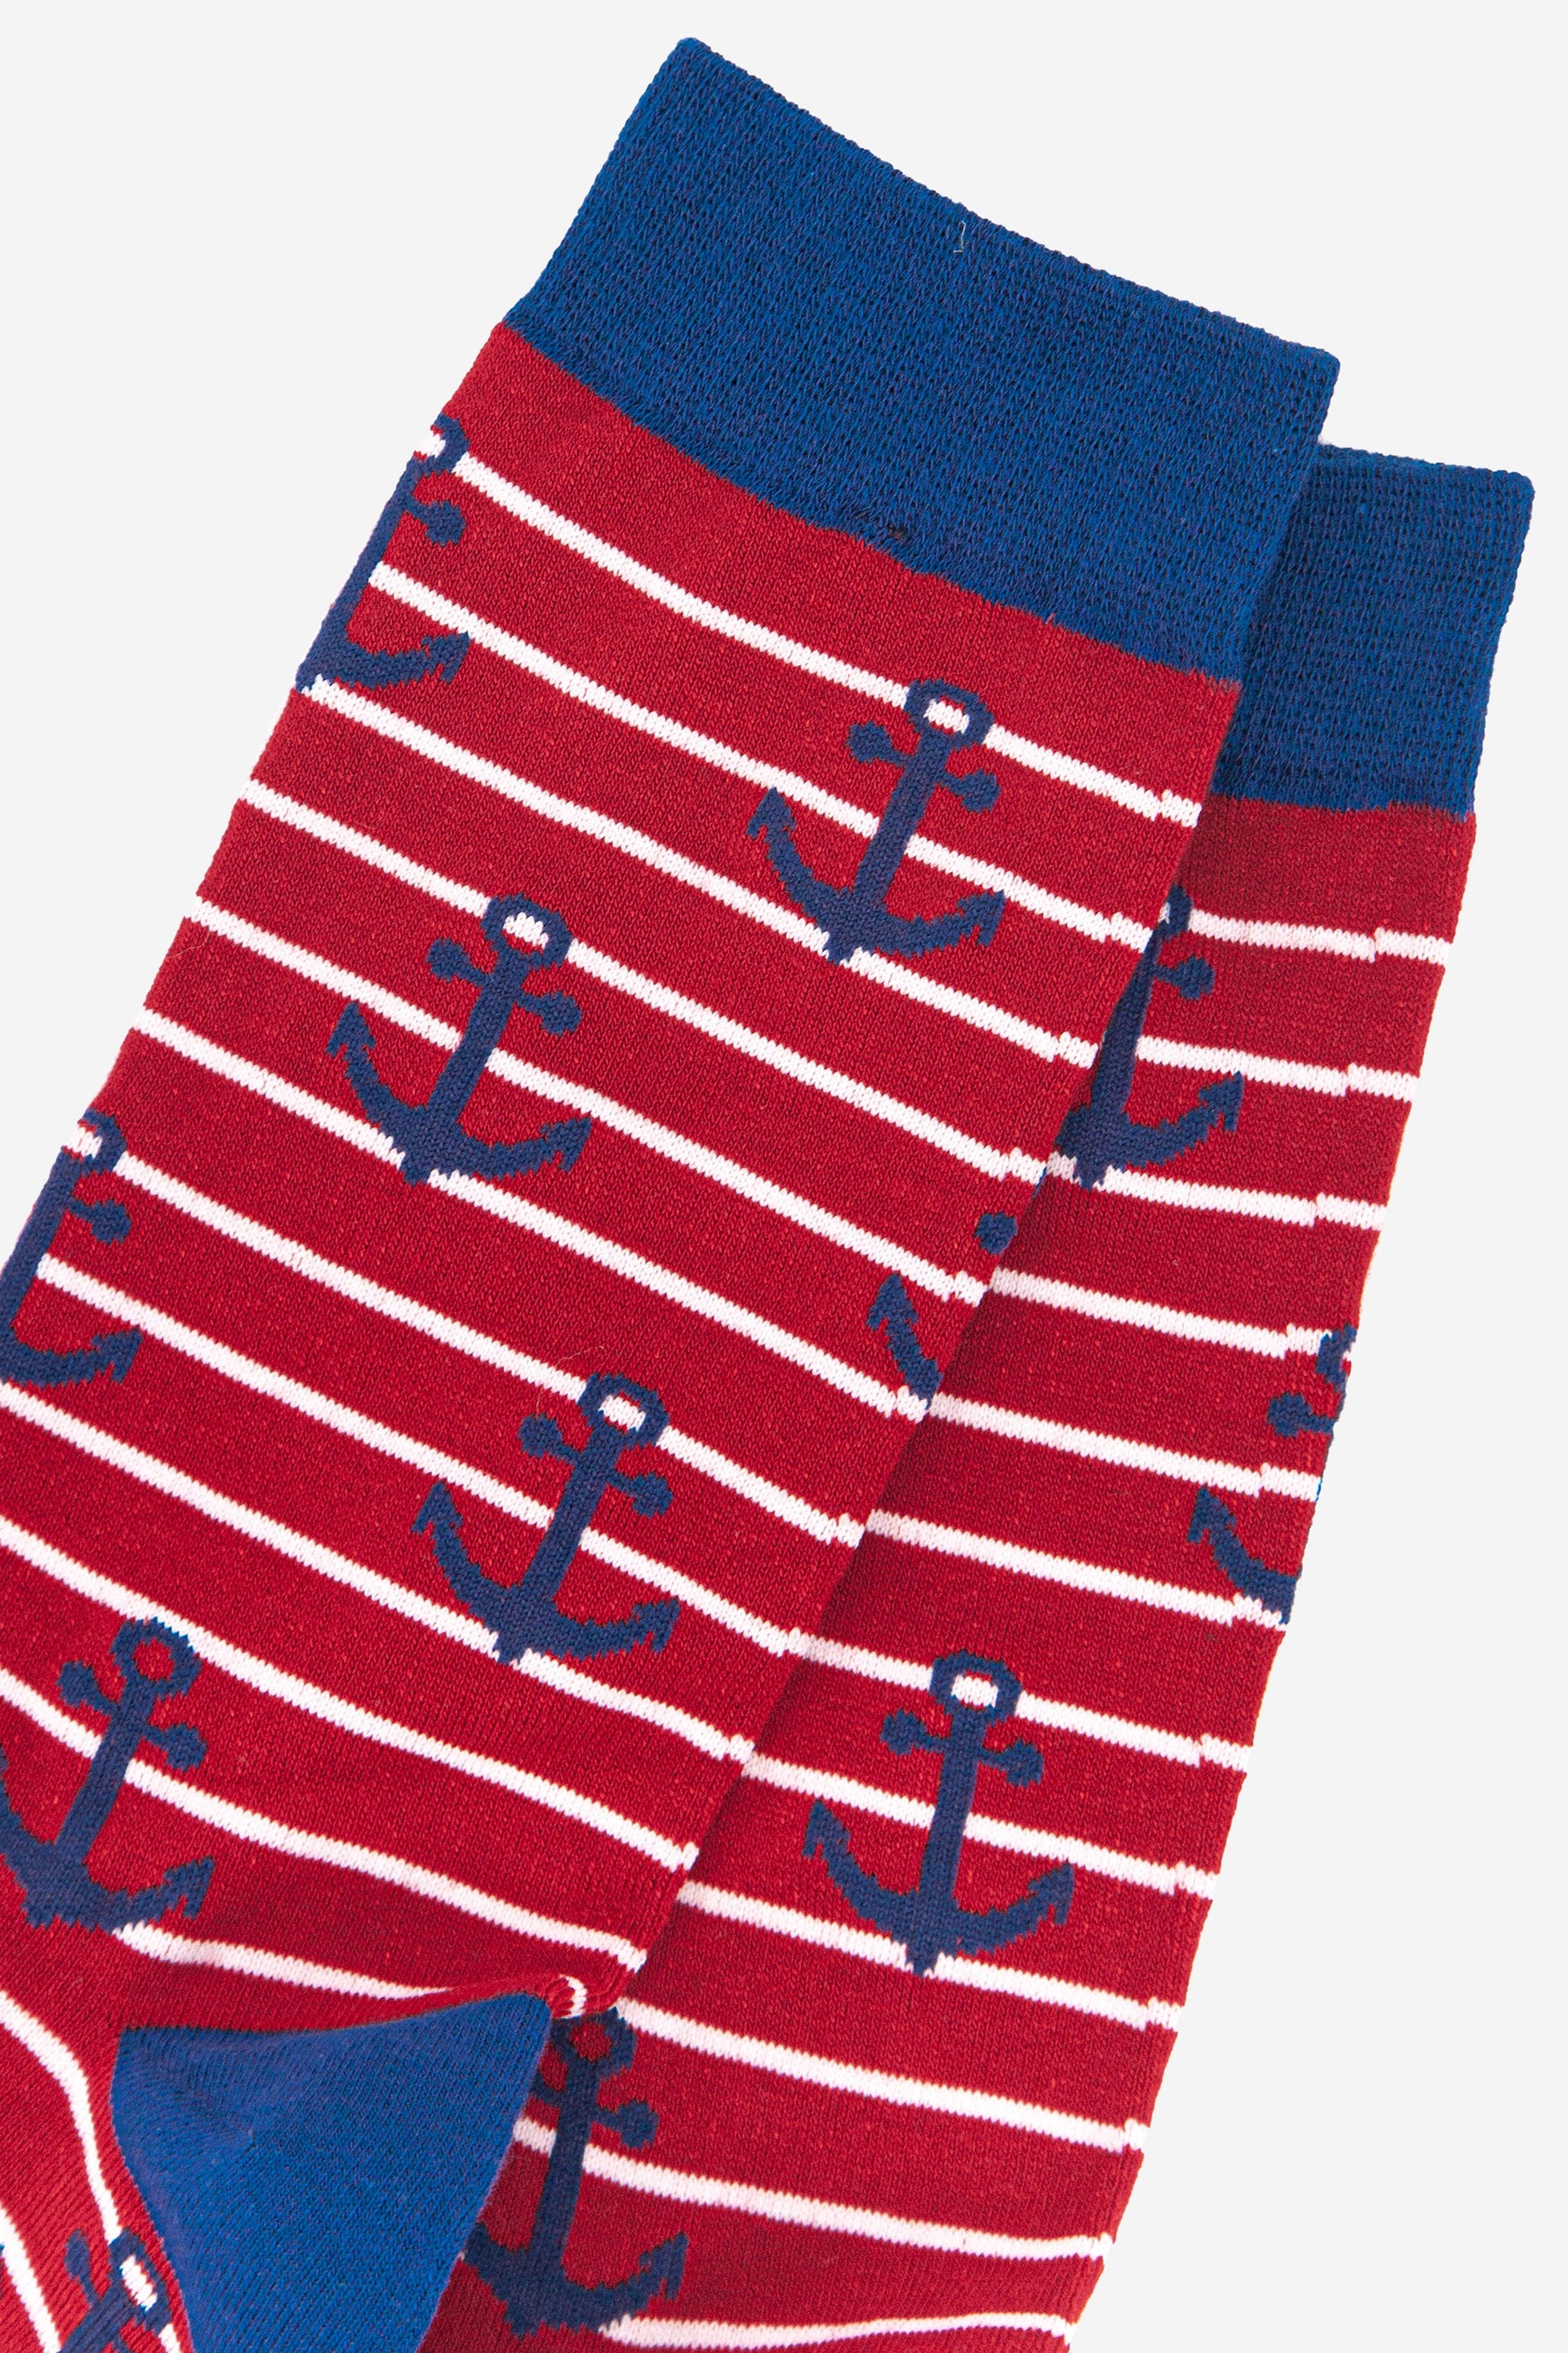 close up of the blue anchor pattern on the red and white striped socks